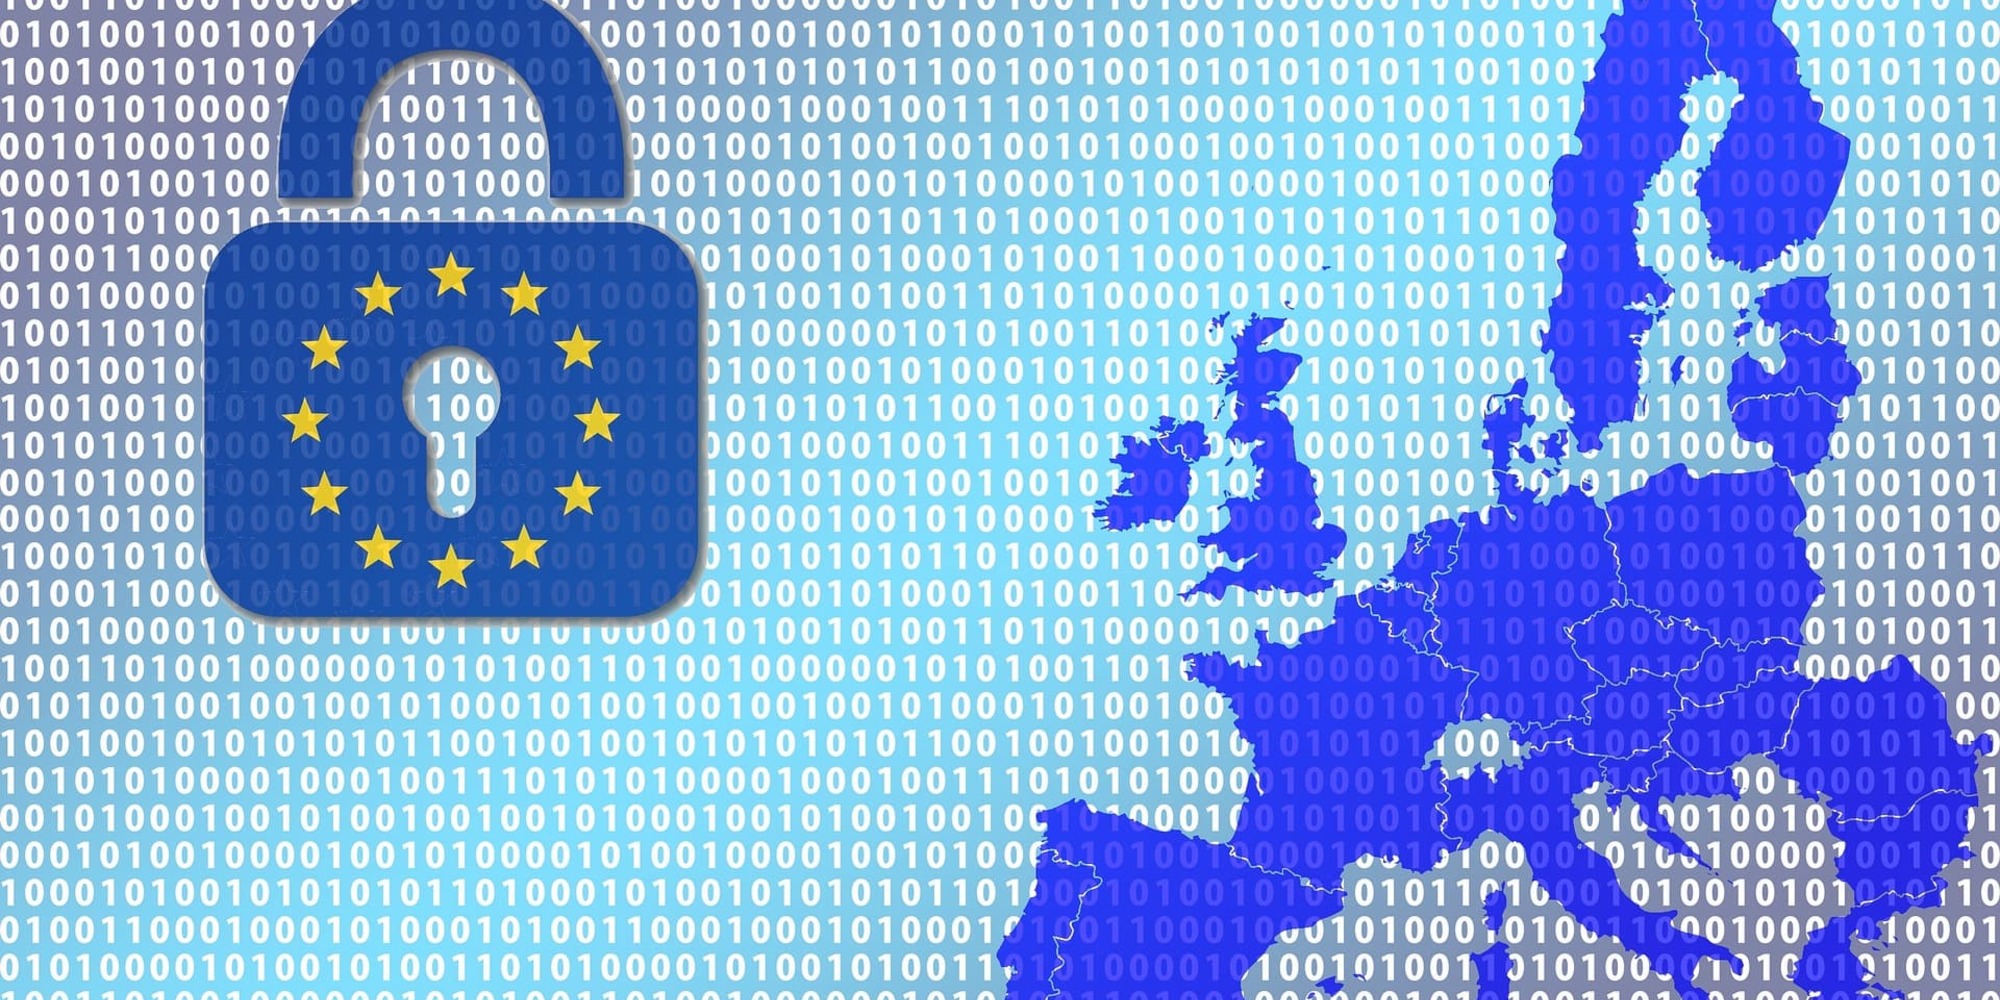 Europe And It's Digital Identity